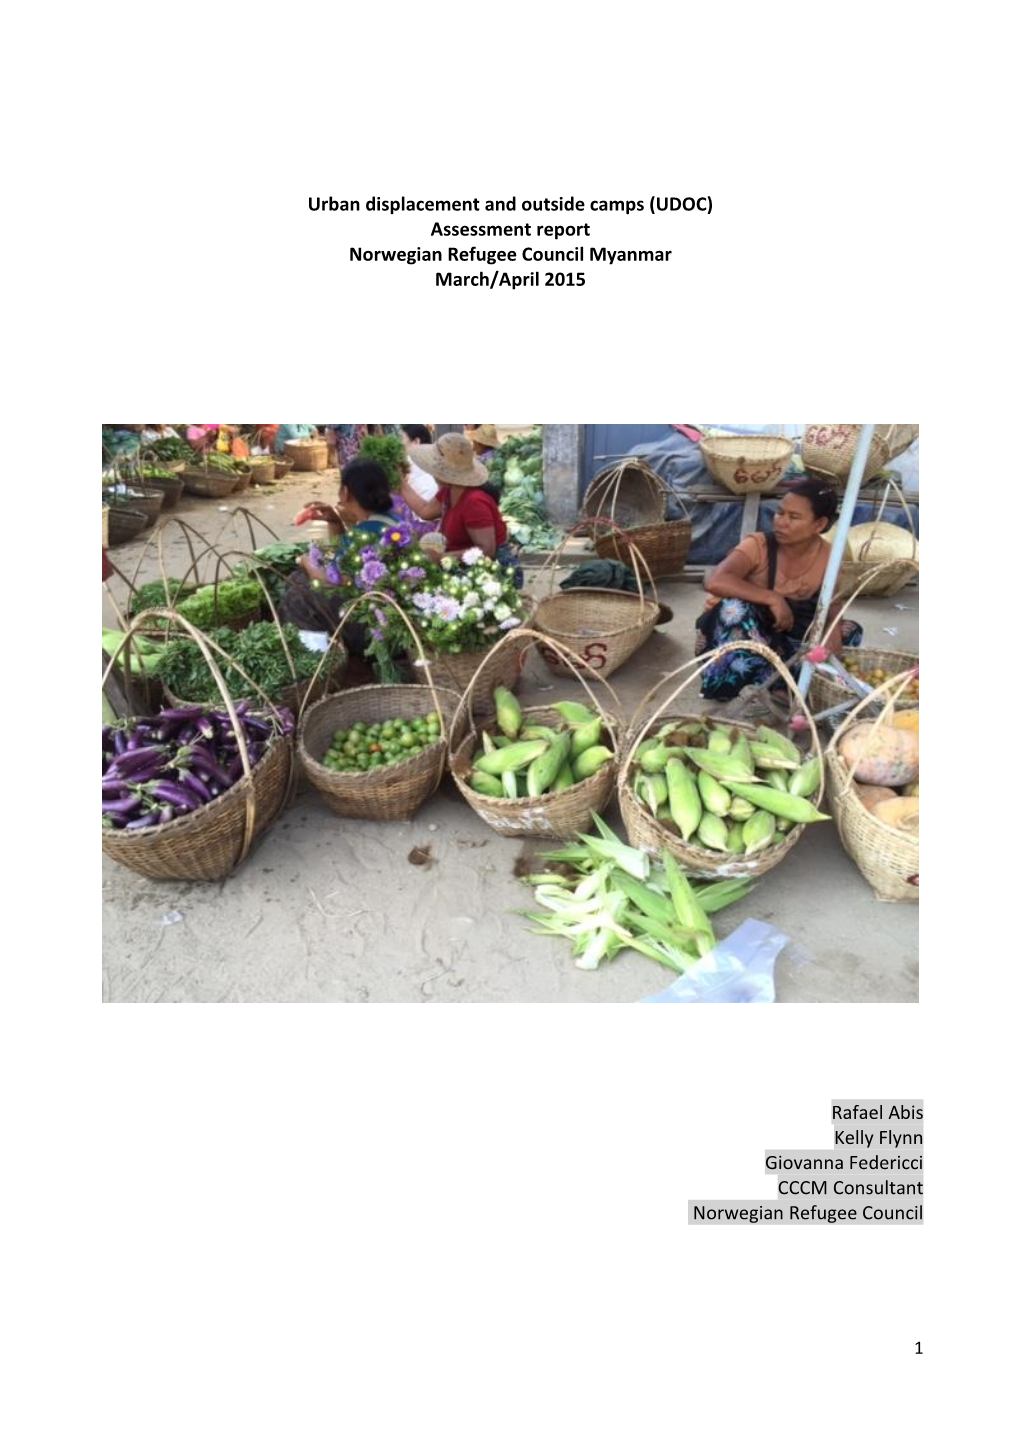 Urban Displacement and Outside Camps (UDOC) Assessment Report Norwegian Refugee Council Myanmar March/April 2015